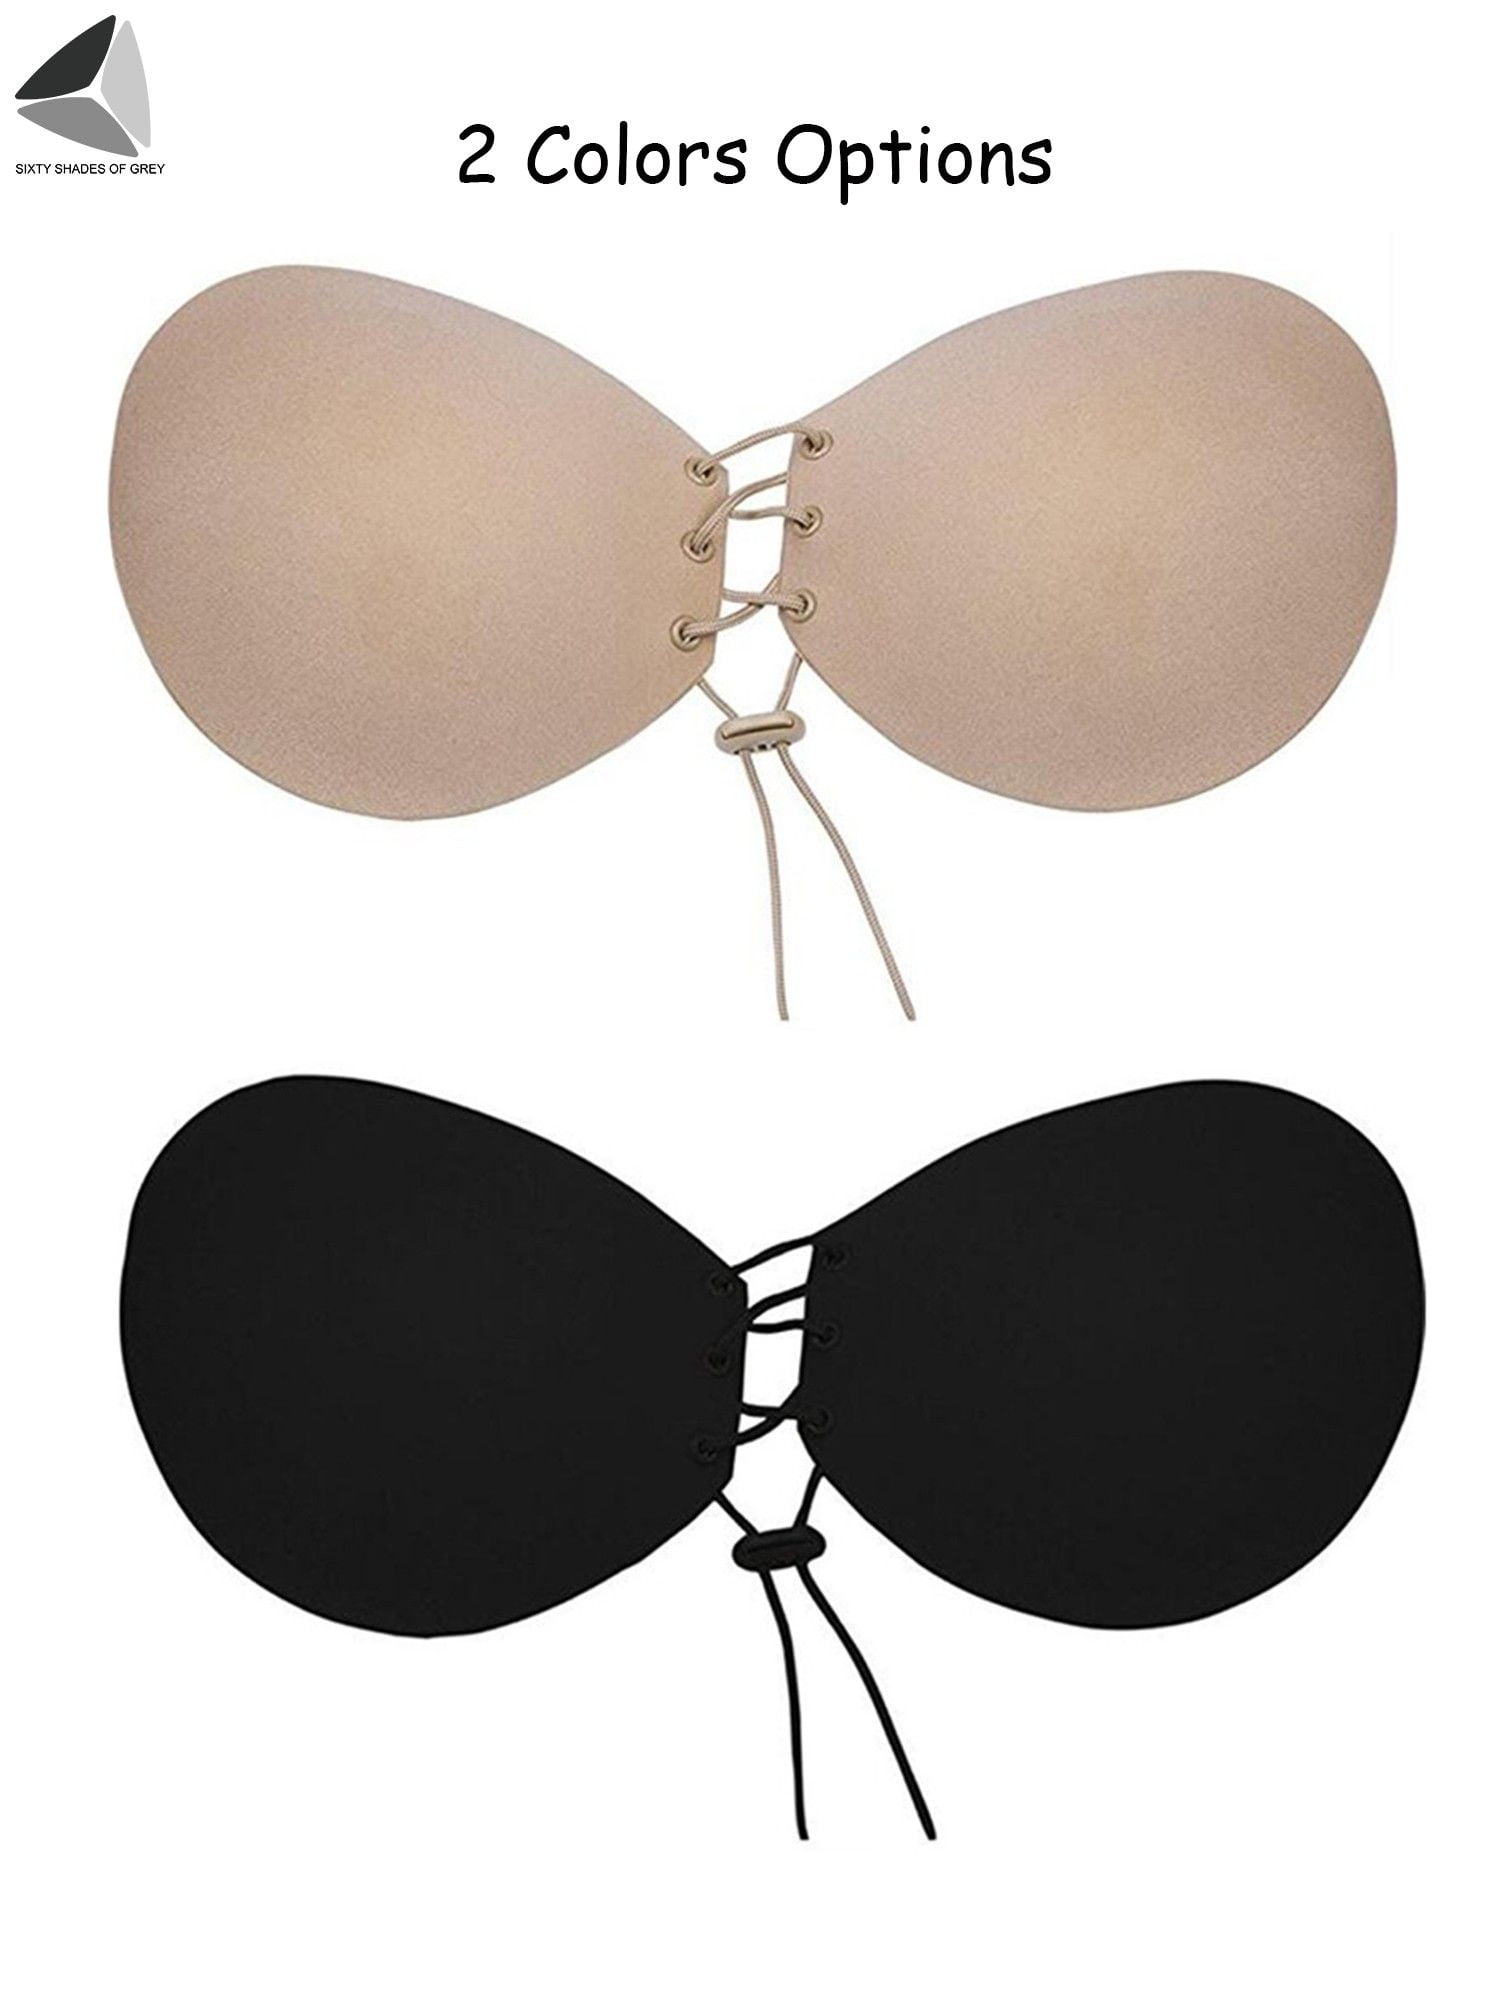 PULLIMORE 2 Pairs Push Up Adhesive Bra Chest Gathered V Neck Silicone Bras  Strapless Backless Invisible Bras (Cup C, Black+Skin)